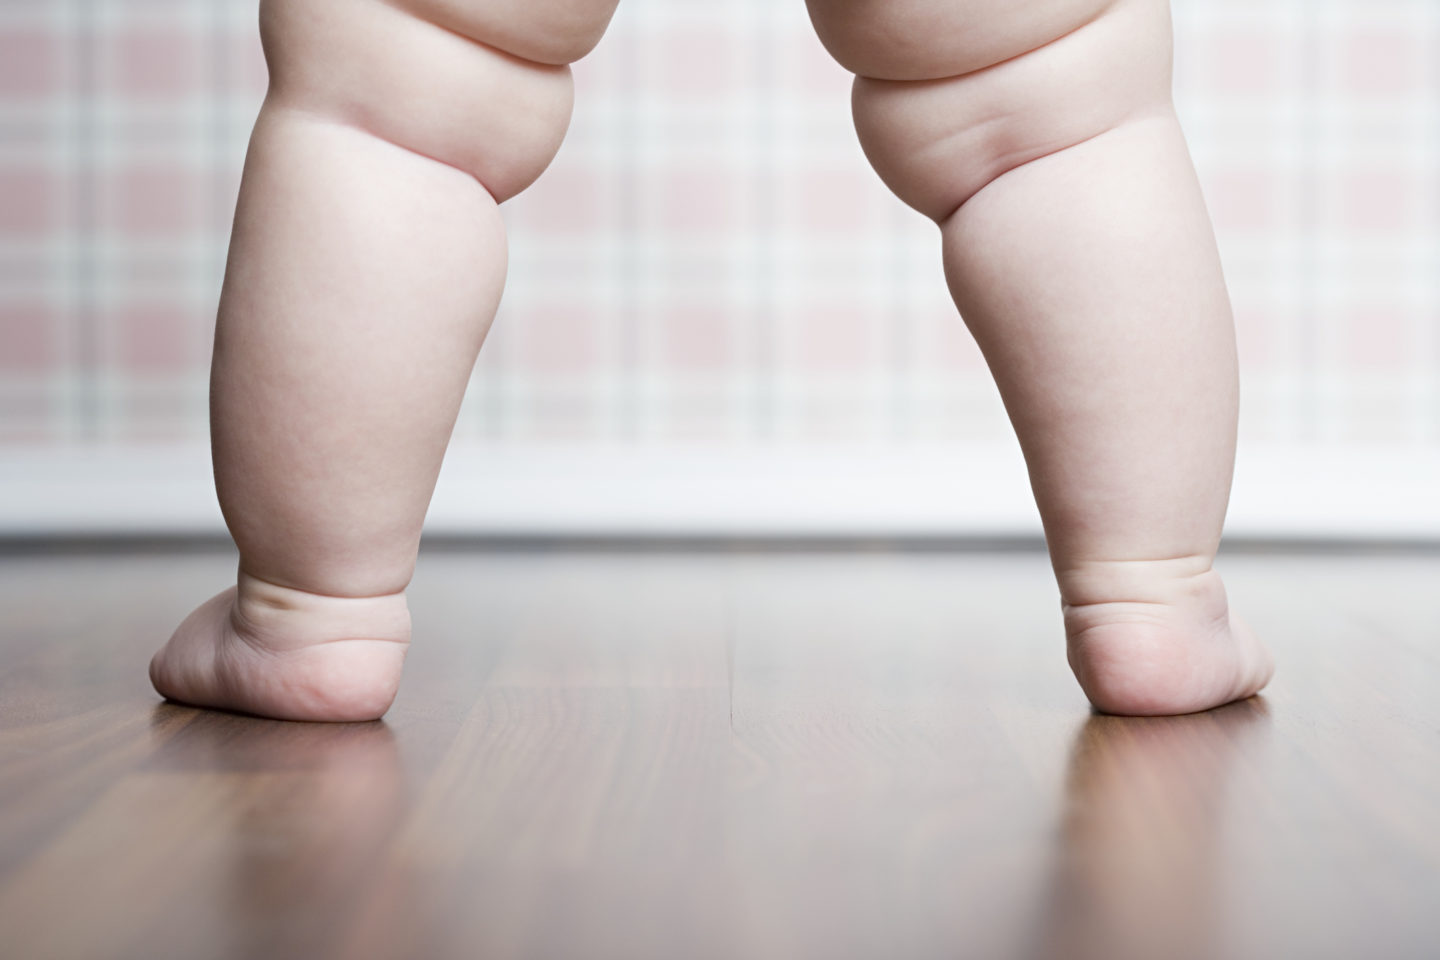 PCOS Drug Tied to Toddler Obesity